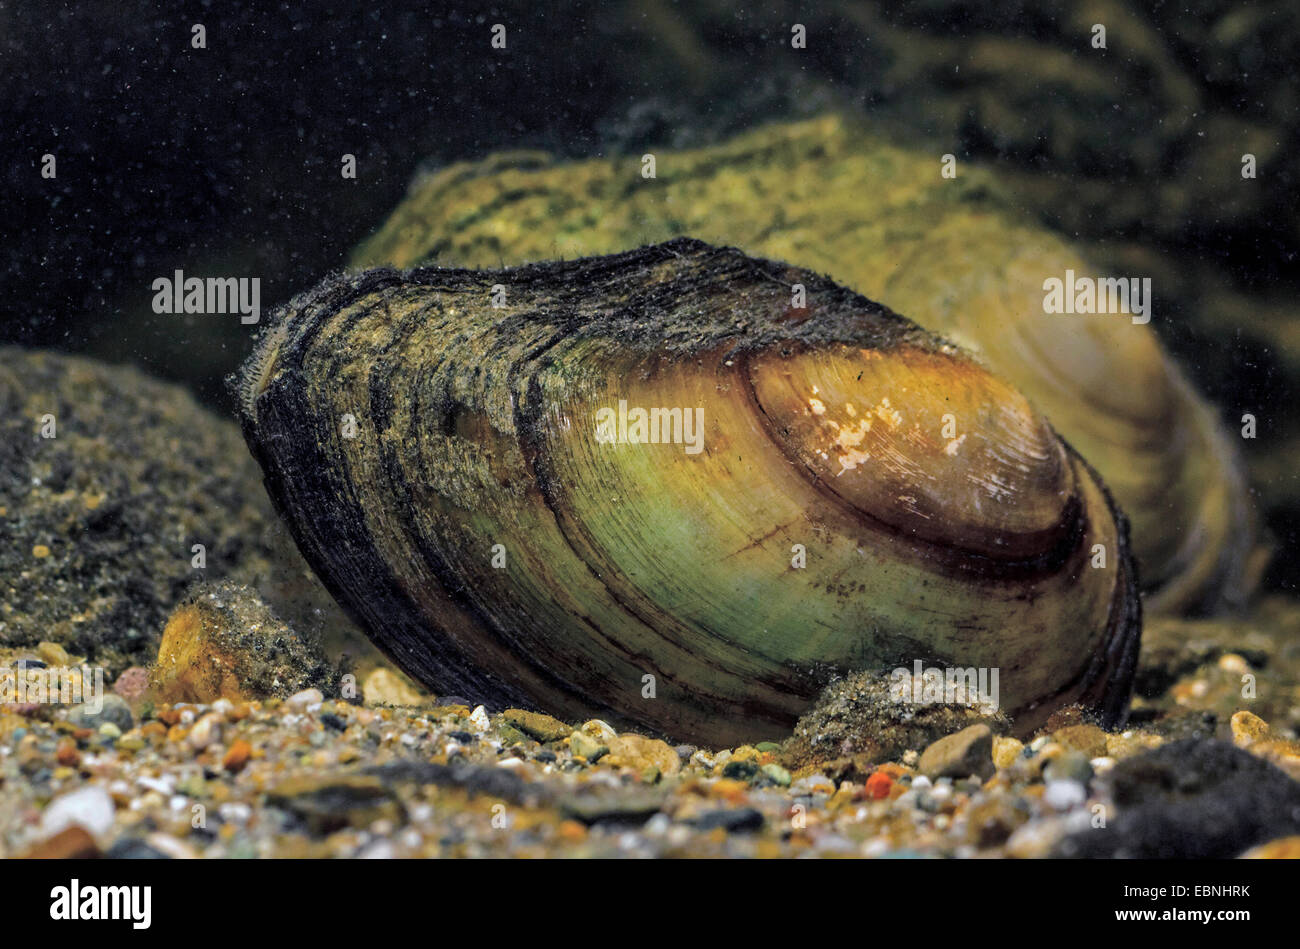 swan mussel (Anodonta cygnea), two swan mussels on the ground, Germany Stock Photo